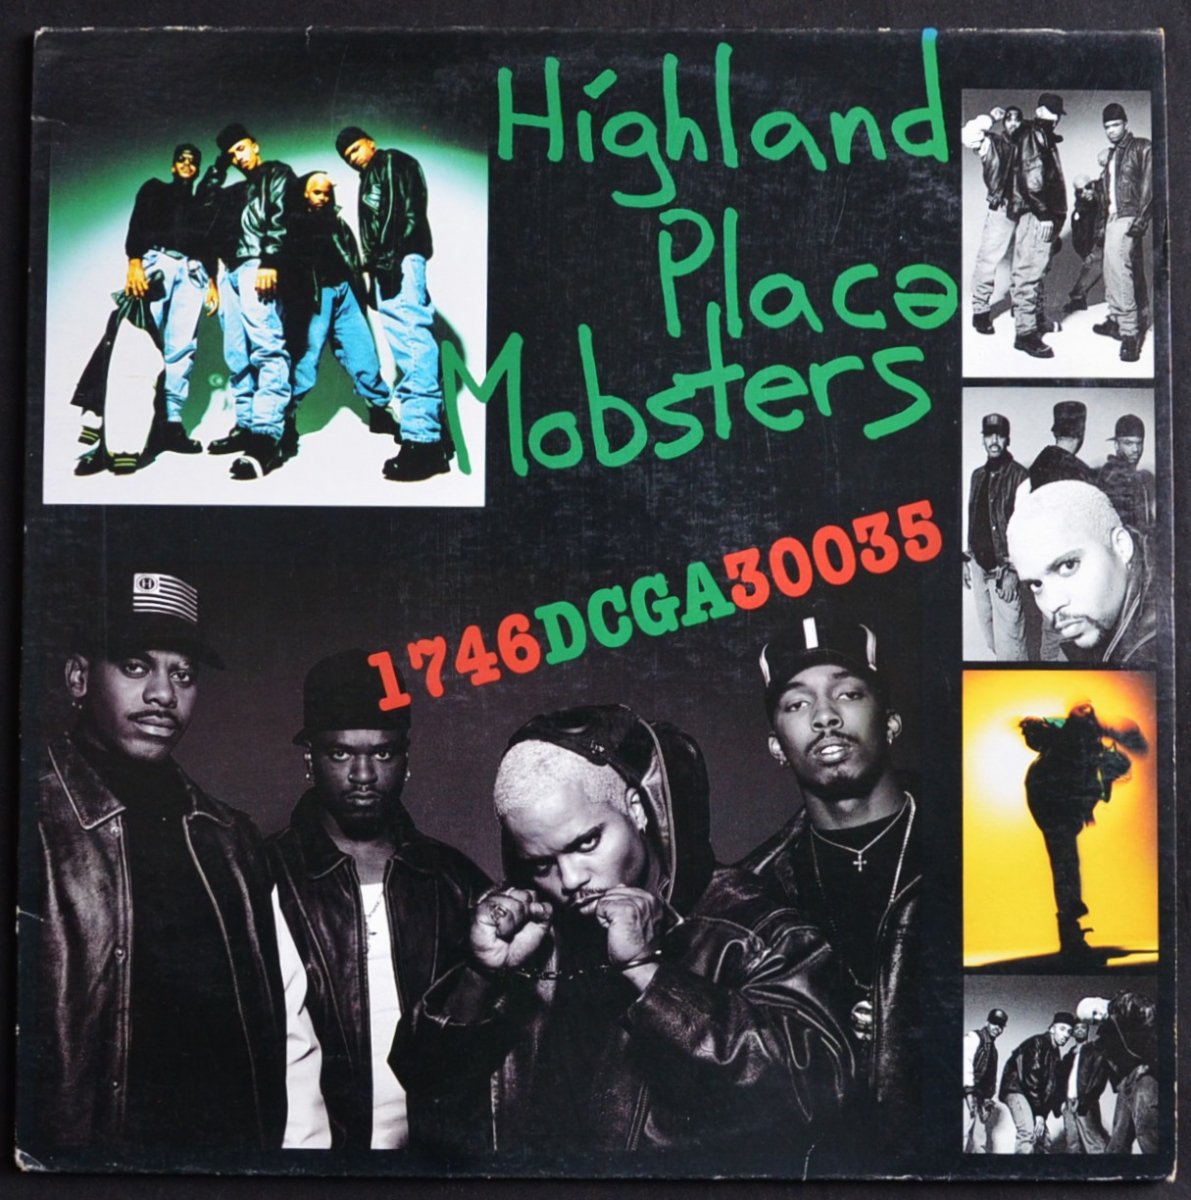 HIGHLAND PLACE MOBSTERS / 1746DCGA30035 (2LP)